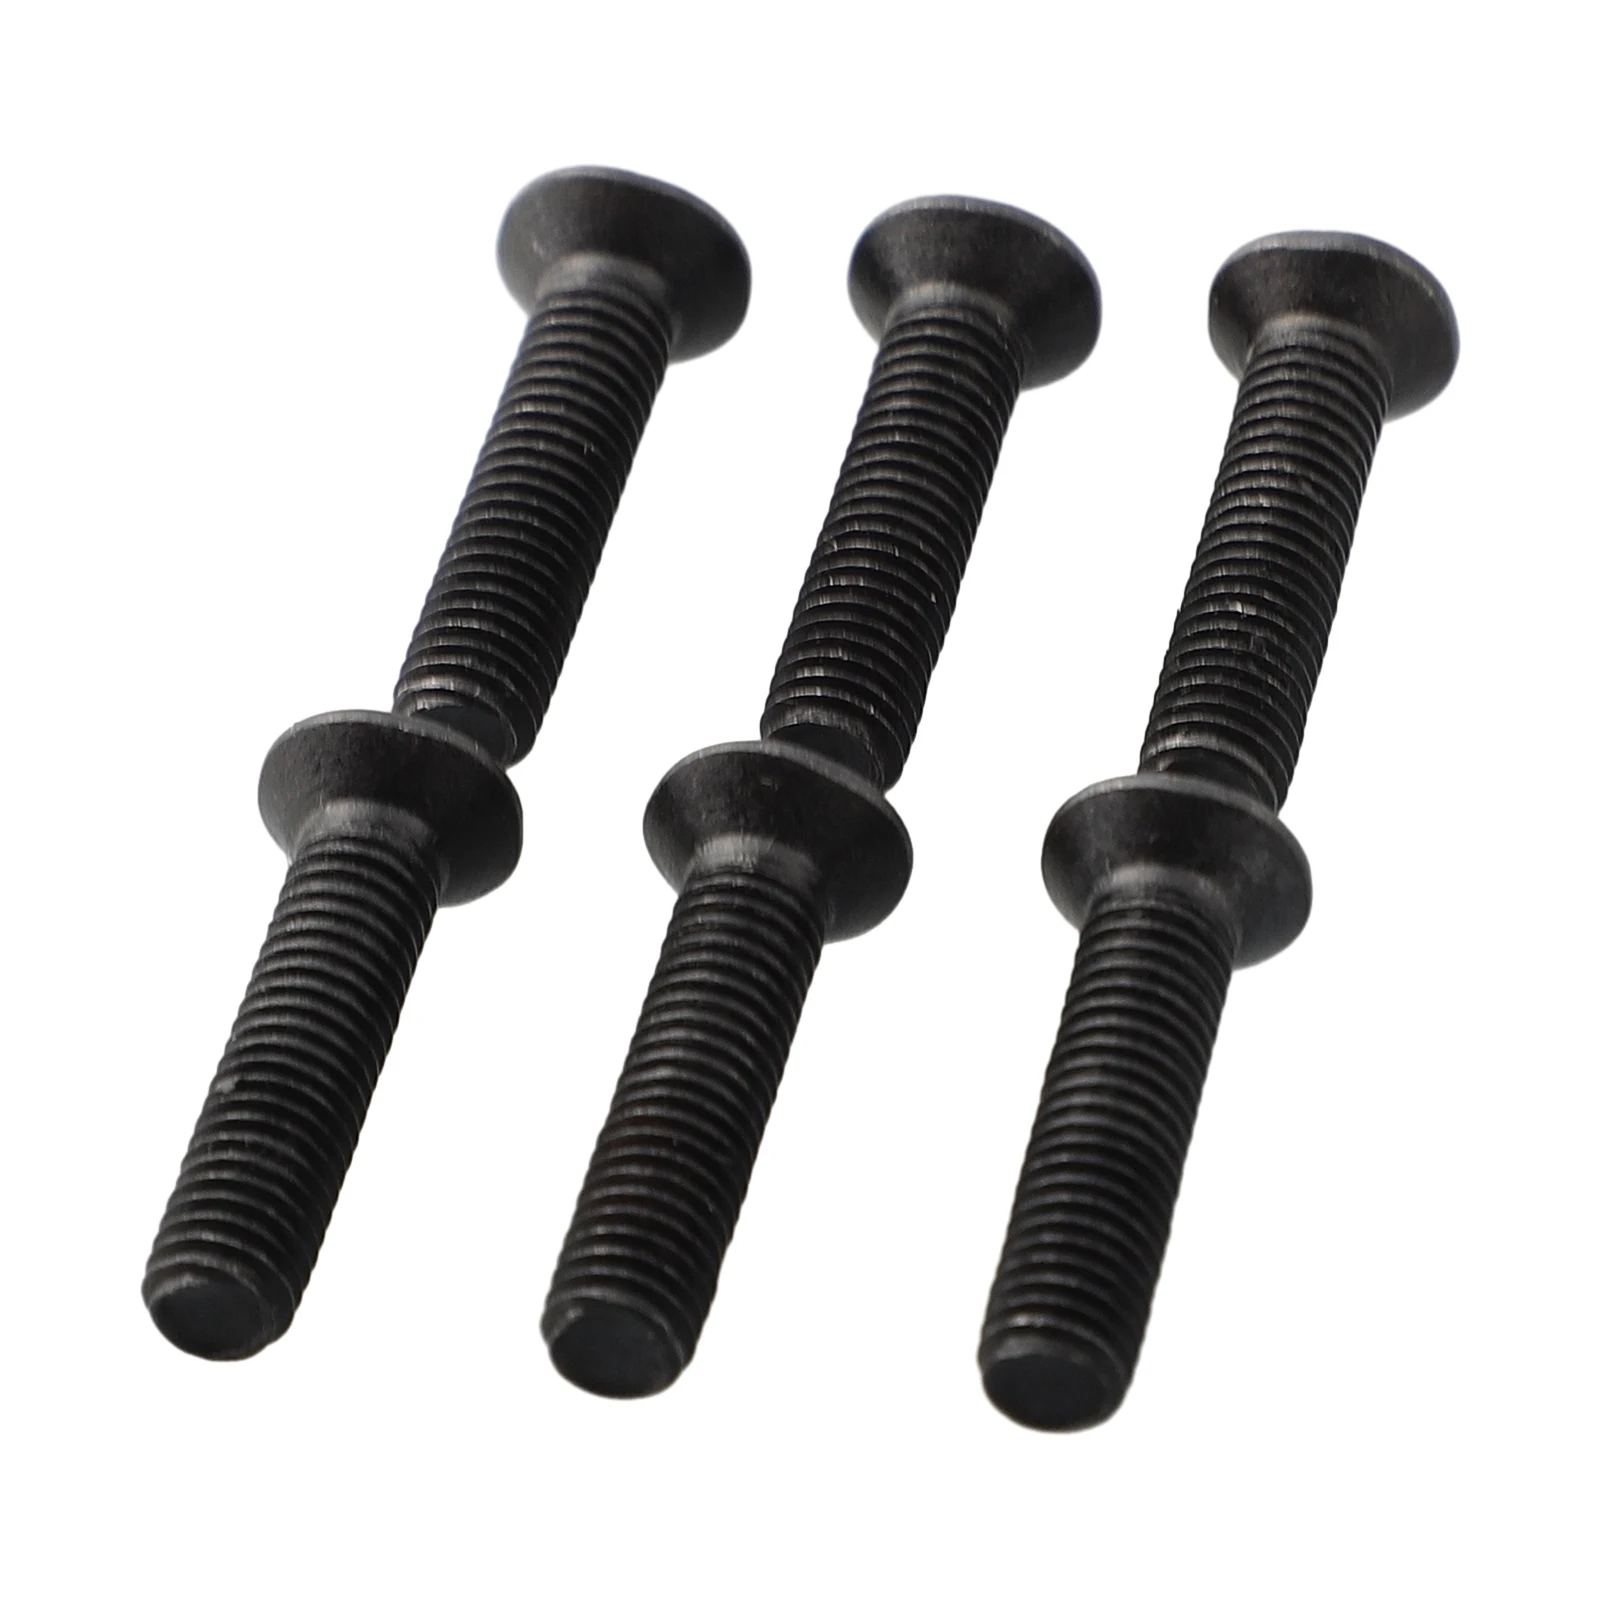 6pcs Fixed Screw Drill Bit Chuck Handle Conversion Screw Electric Drill Replacement Countersunk Screw M5/M6 22mm Black Hand Tool 6pcs fixed screw drill bit chuck handle adapter conversion screw electric drill replacement countersunk screw for m5 m6 22mm